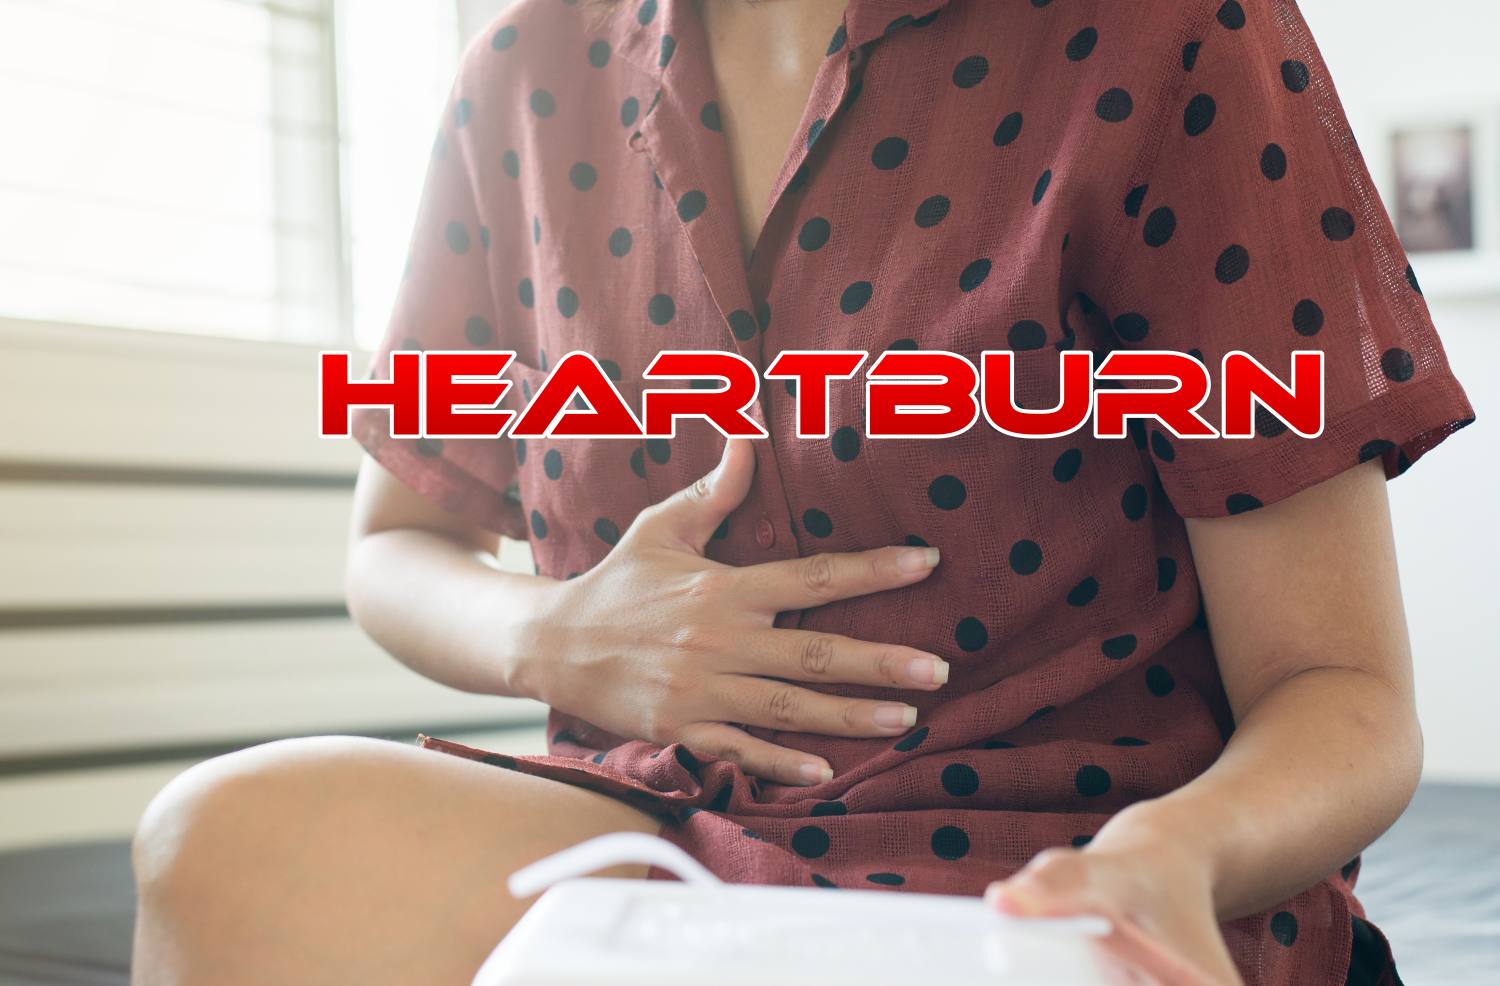 10 Home Remedies for Heartburn